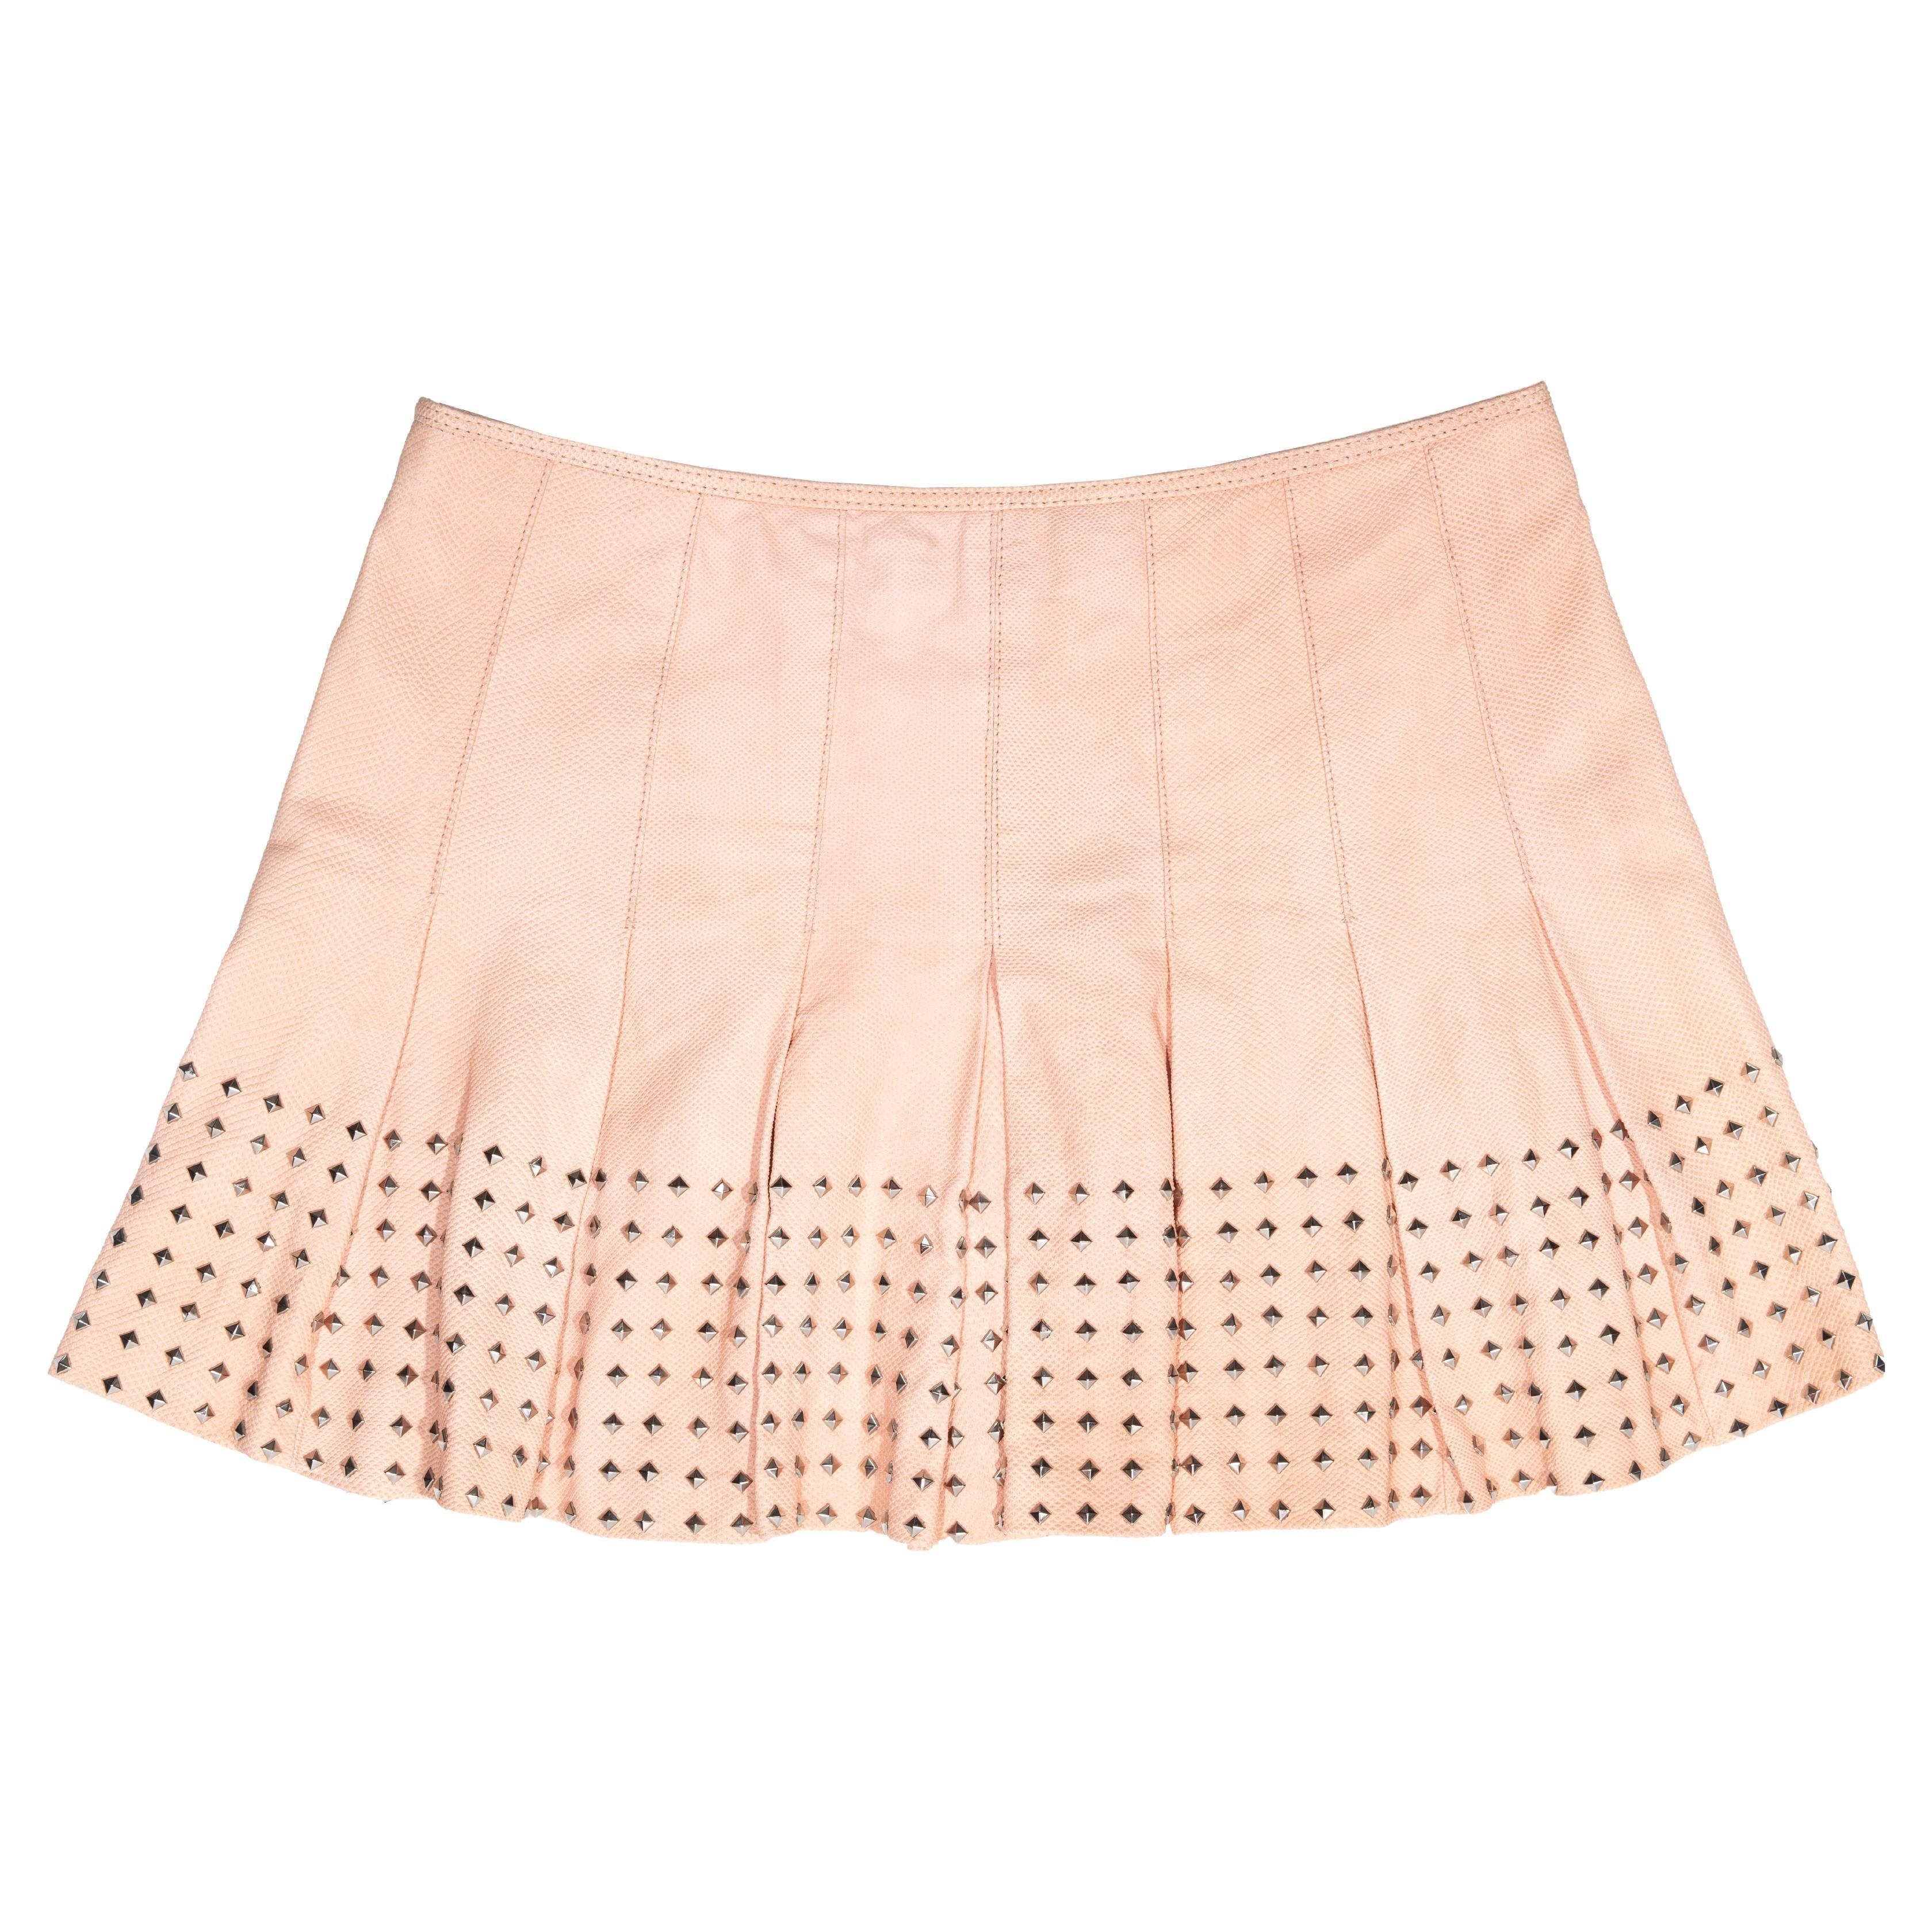 Gianni Versace pink pleated leather mini skirt, ss 2003